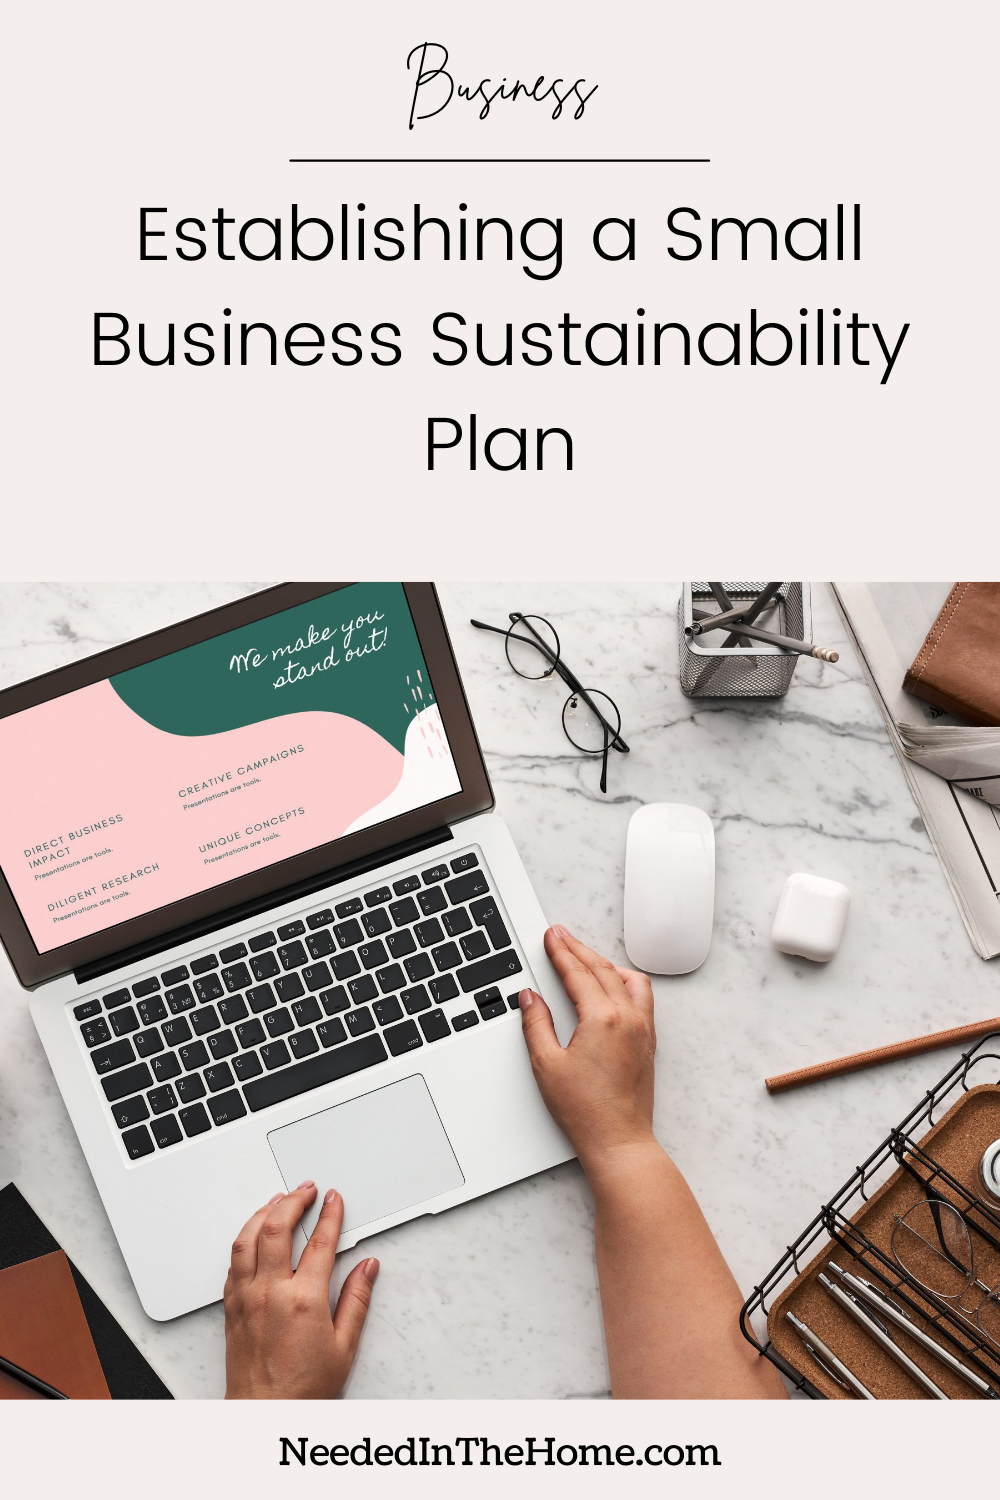 pinterest-pin-description business establishing a small business sustainability plan hands on laptop glasses mouse desk items neededinthehome